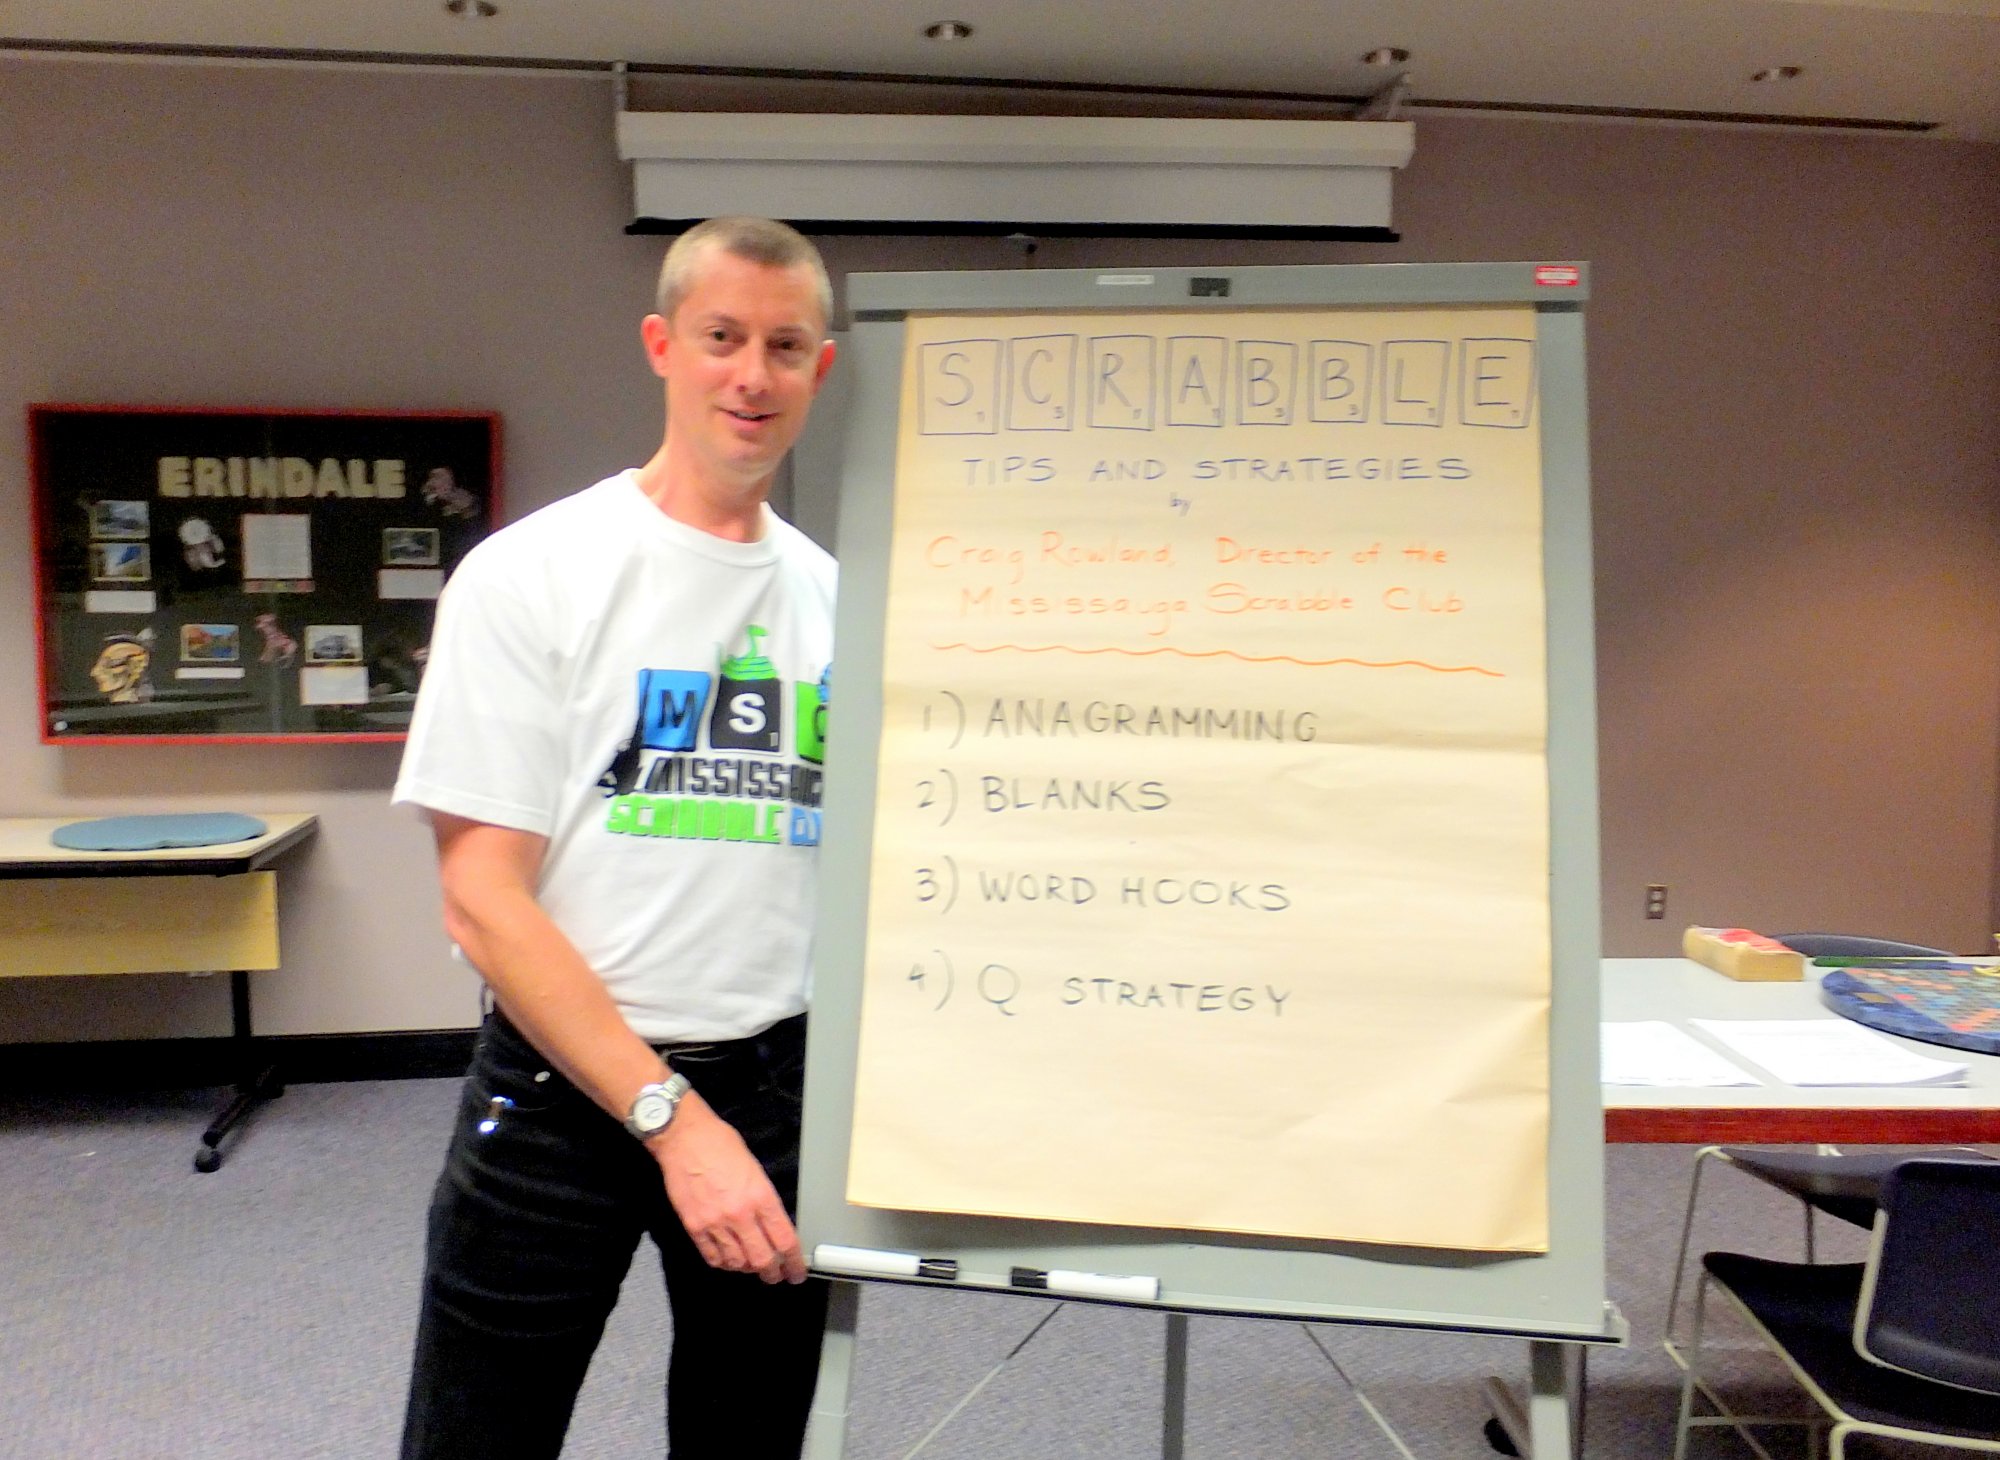 Craig Rowland presents Improve Your Scrabble Game at Mississauga Centra Library, 21 Oct. 2014. Photo by I Lee.